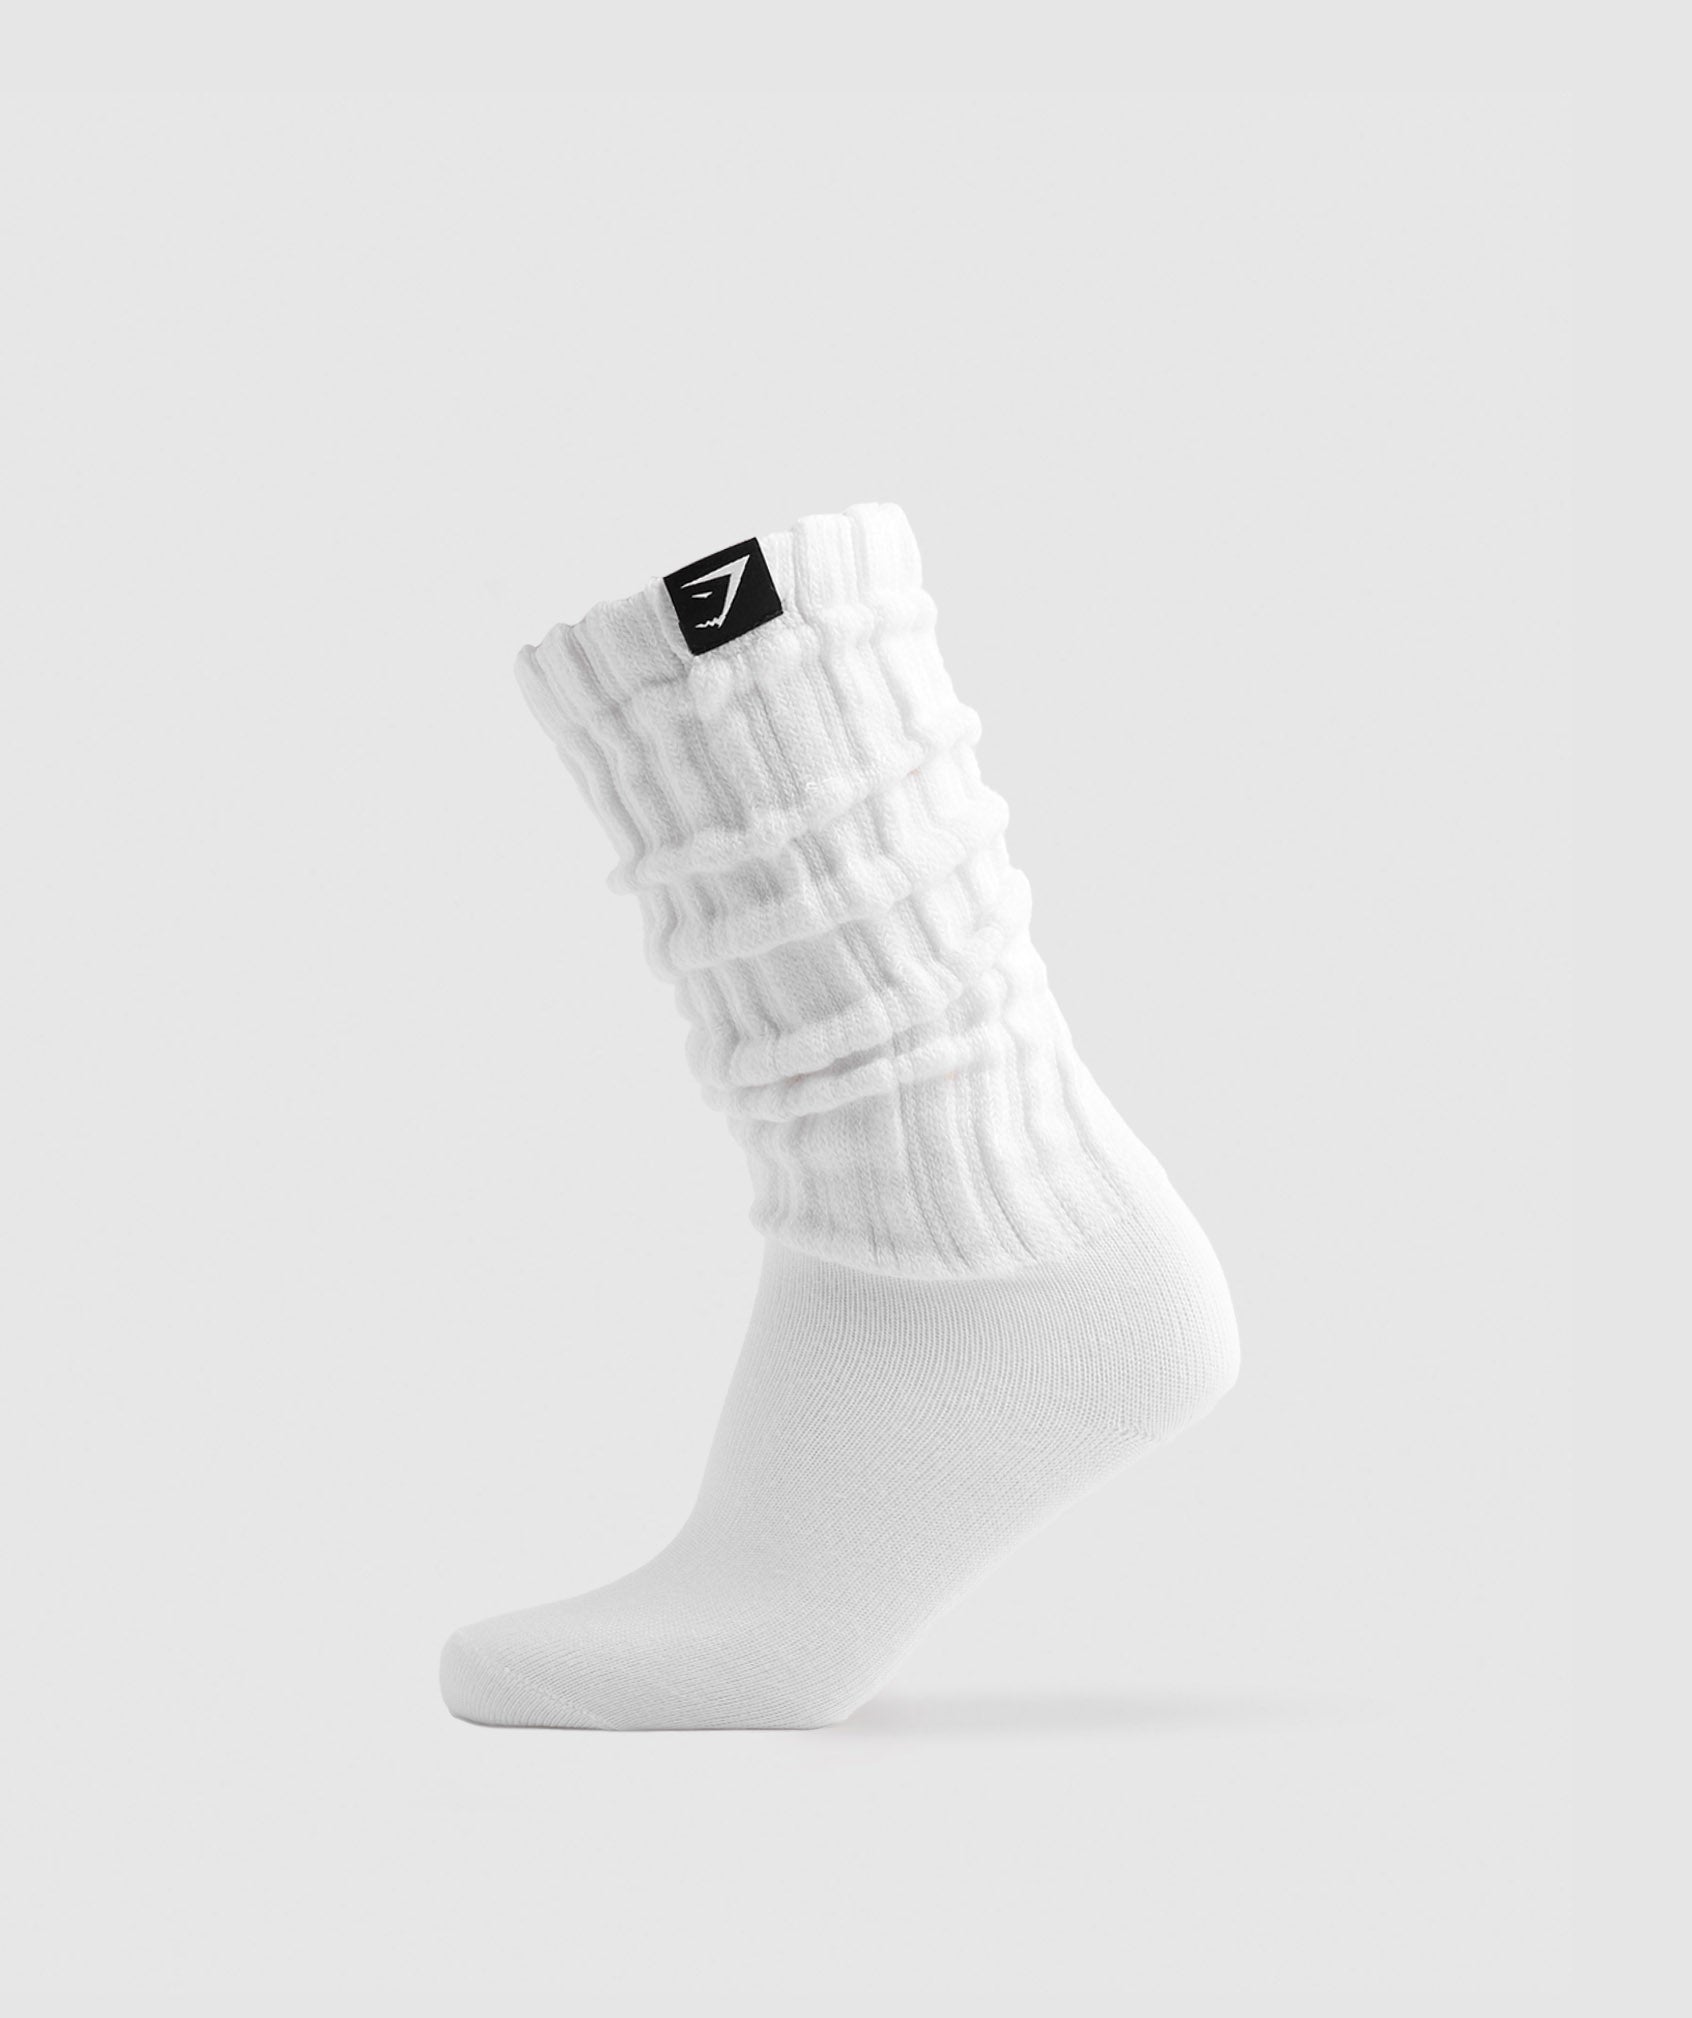 Comfy Rest Day Socks in White - view 1